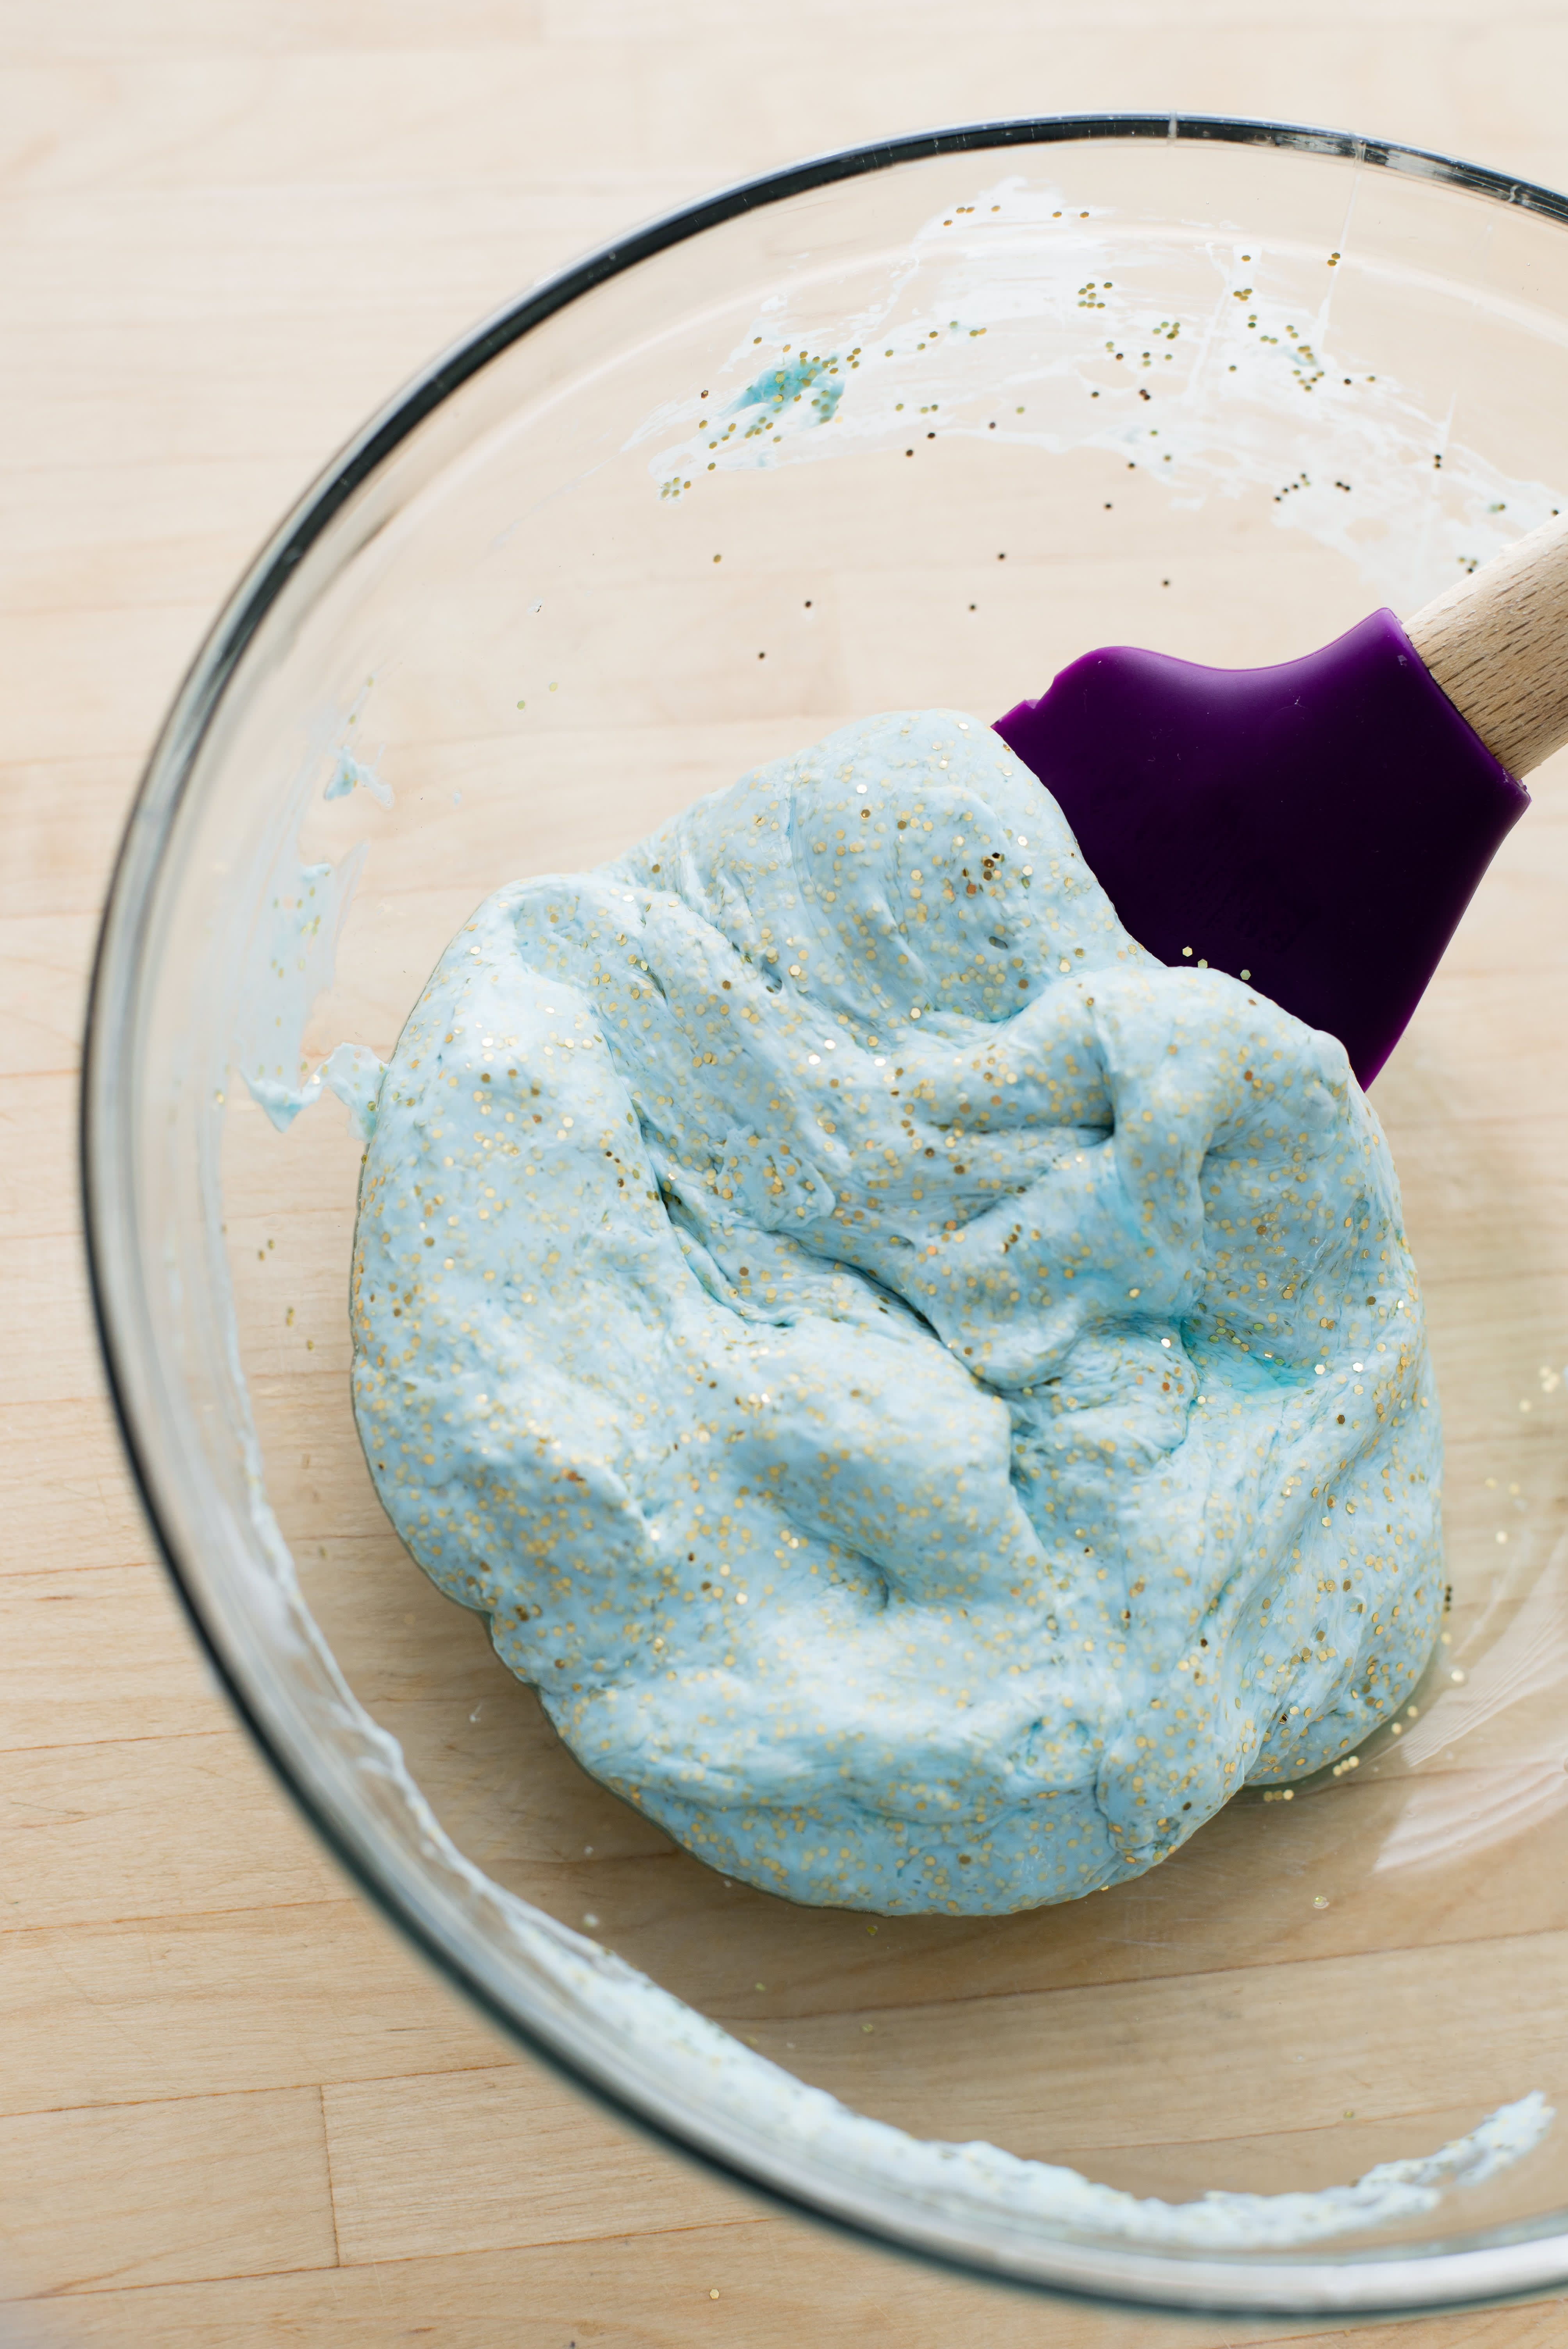 How to Make 3-Ingredient Cleaning Slime at Home